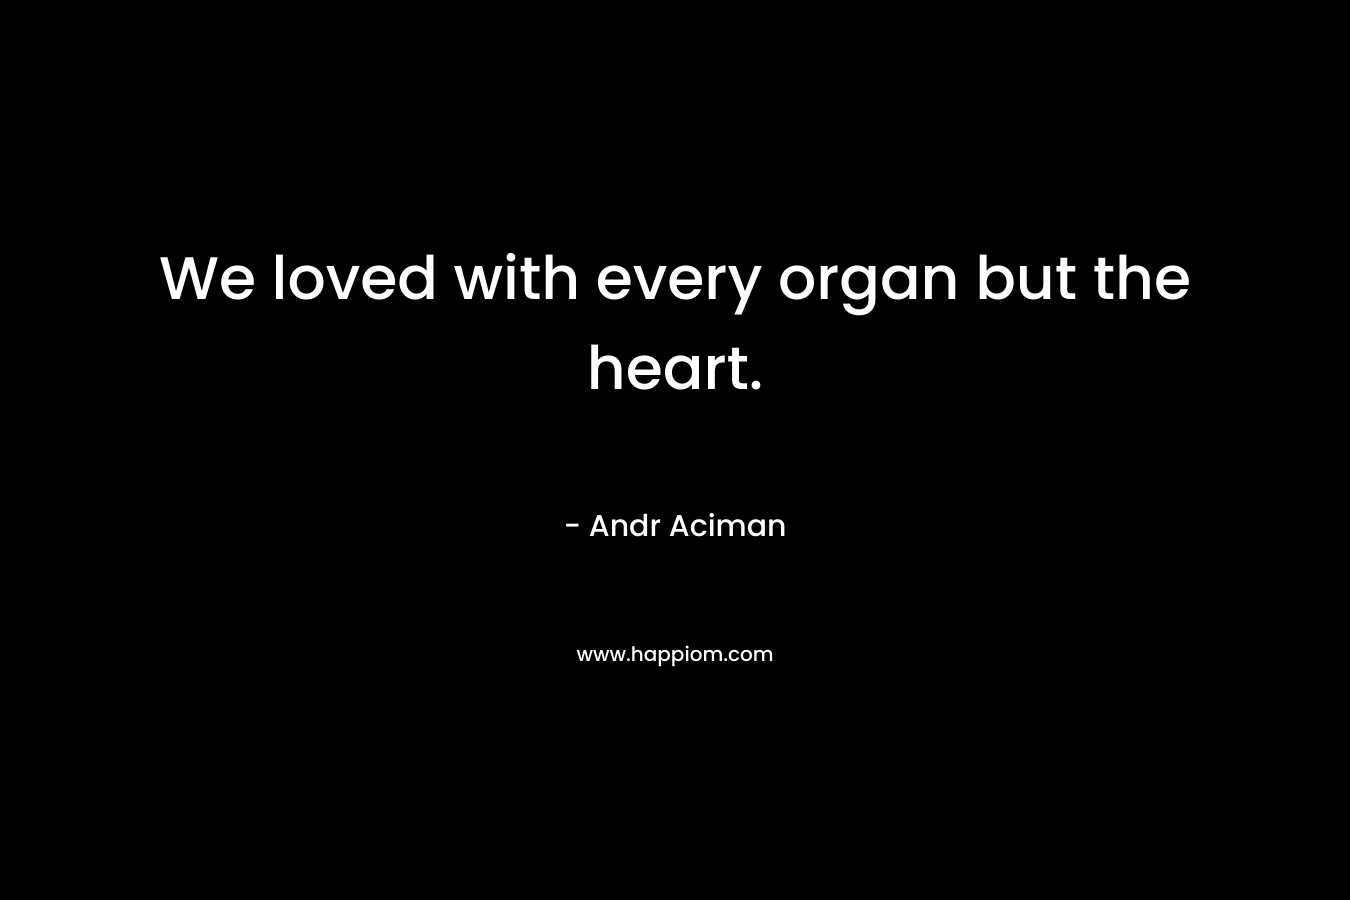 We loved with every organ but the heart. – Andr Aciman